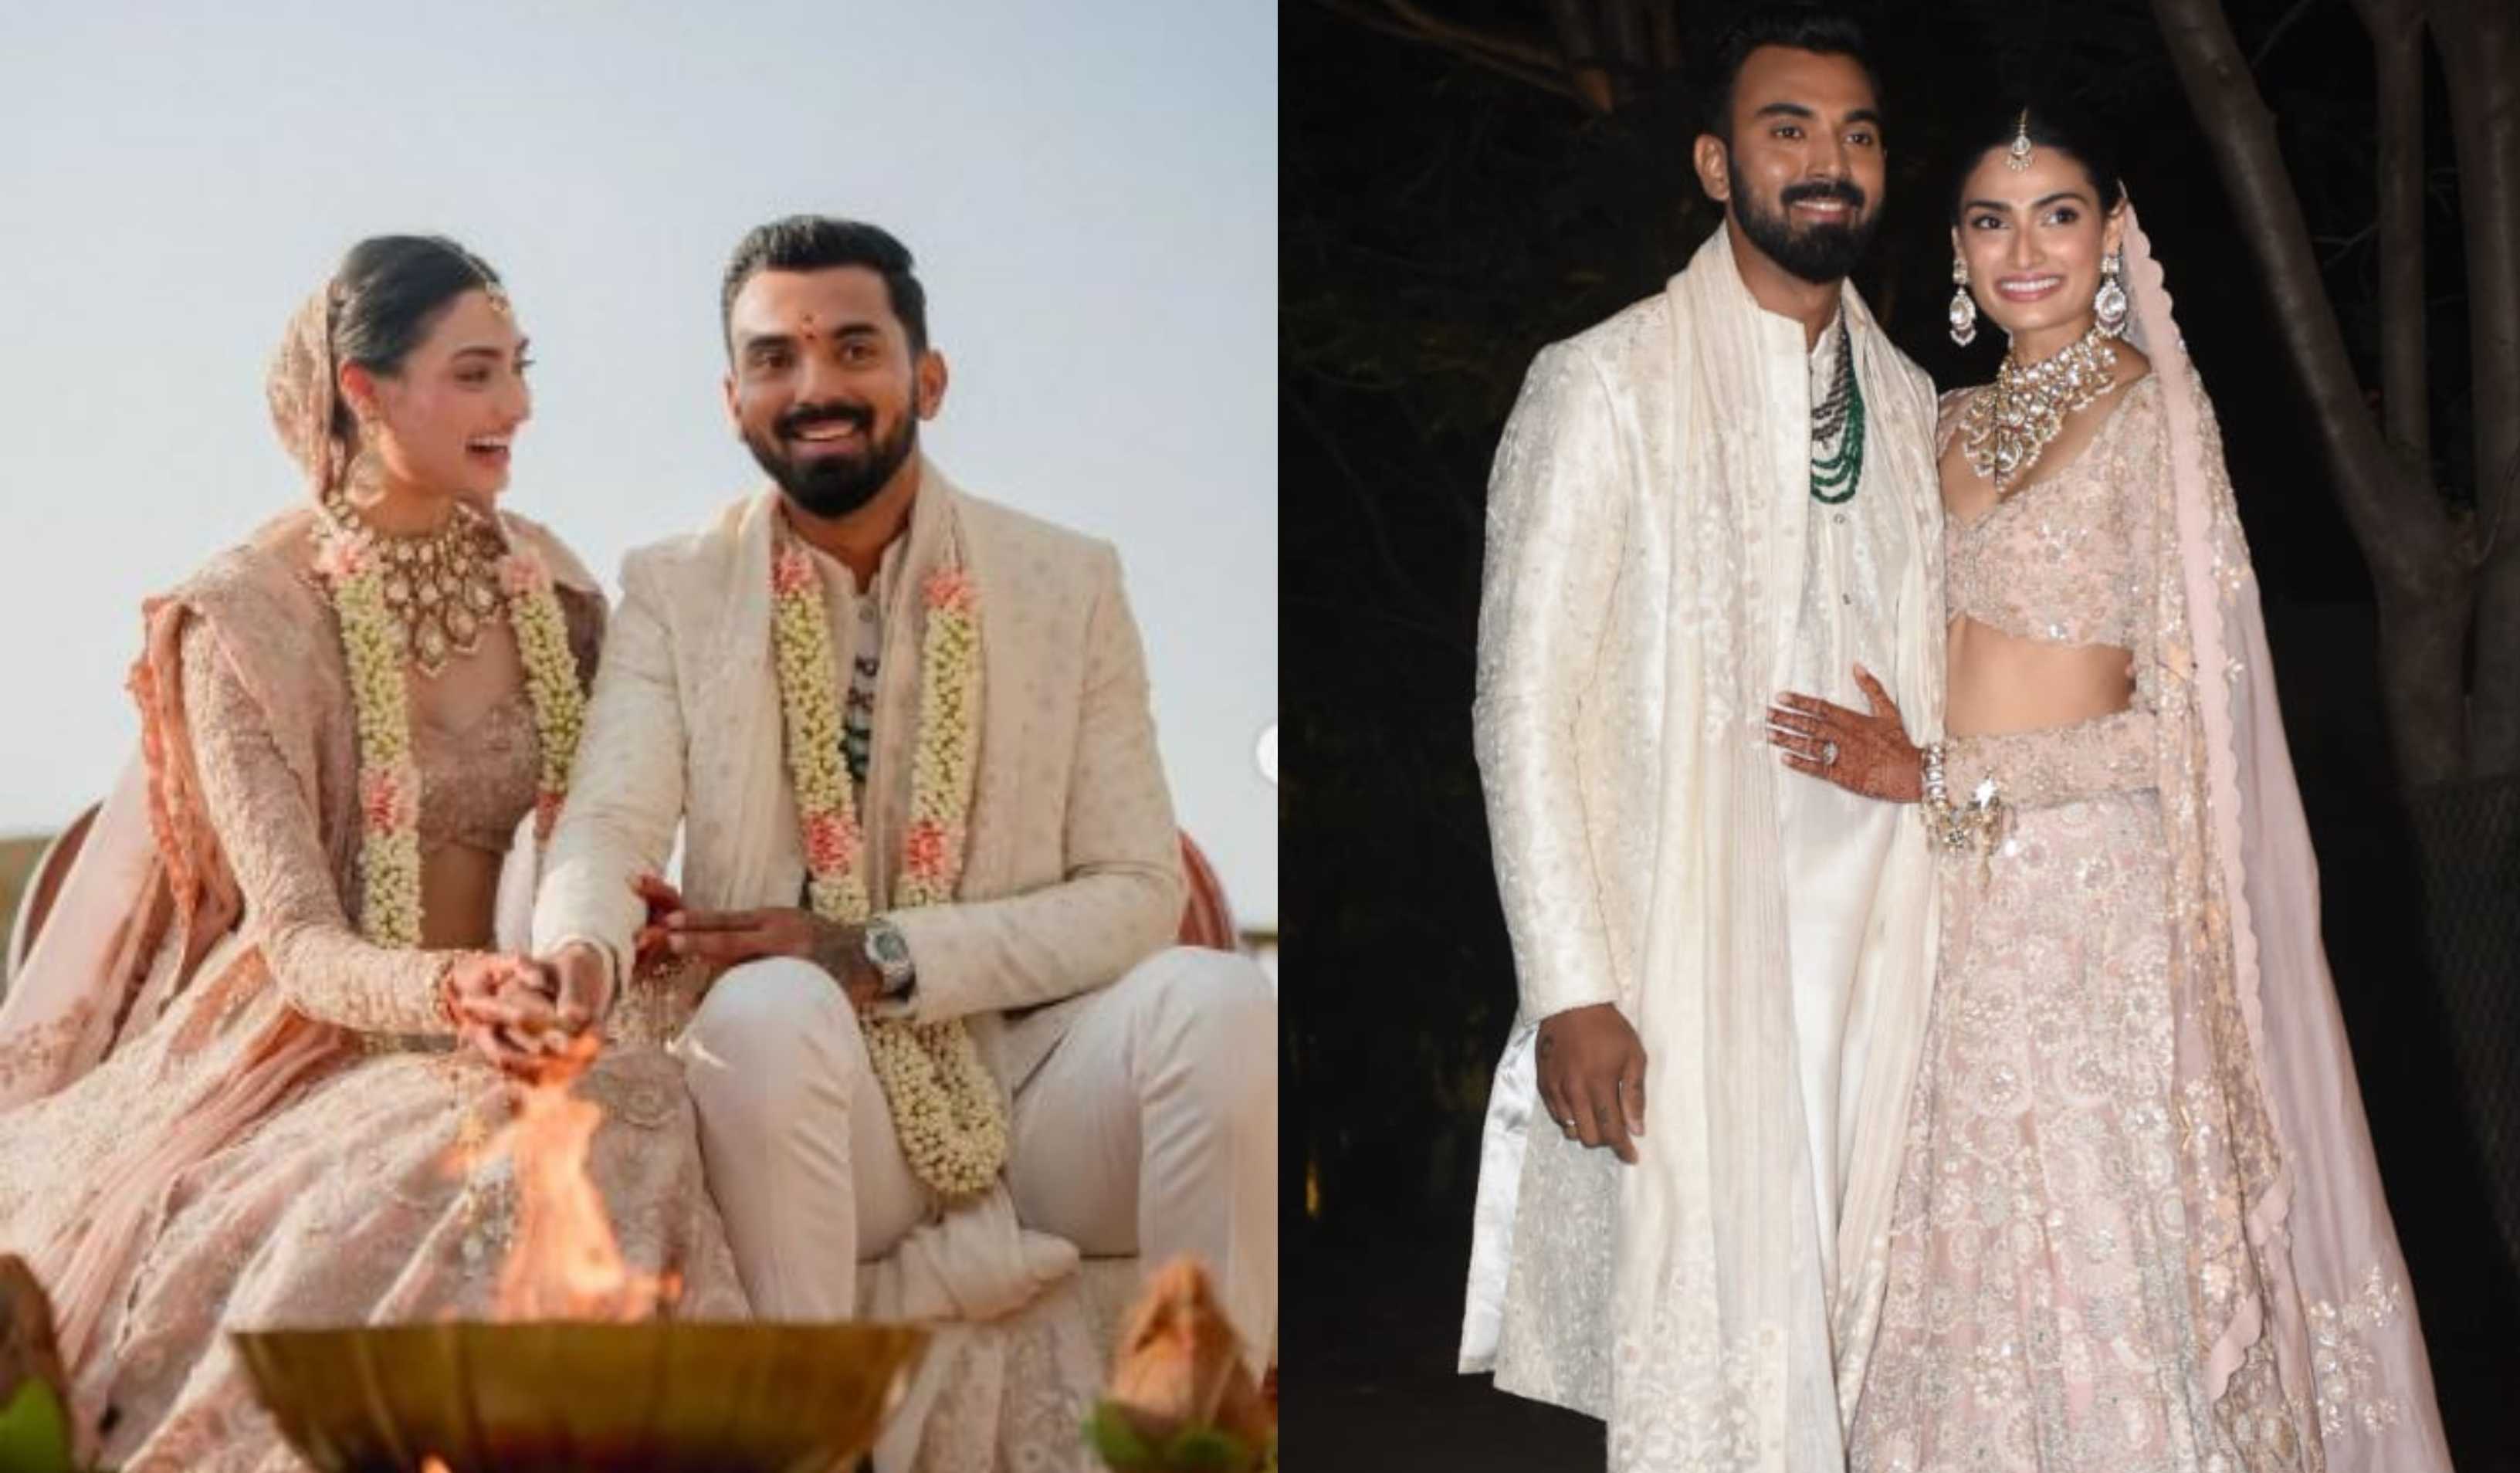 Athiya Shetty and KL Rahul make their first appearance as a married couple, you can't miss that giant rock on the bride's finger